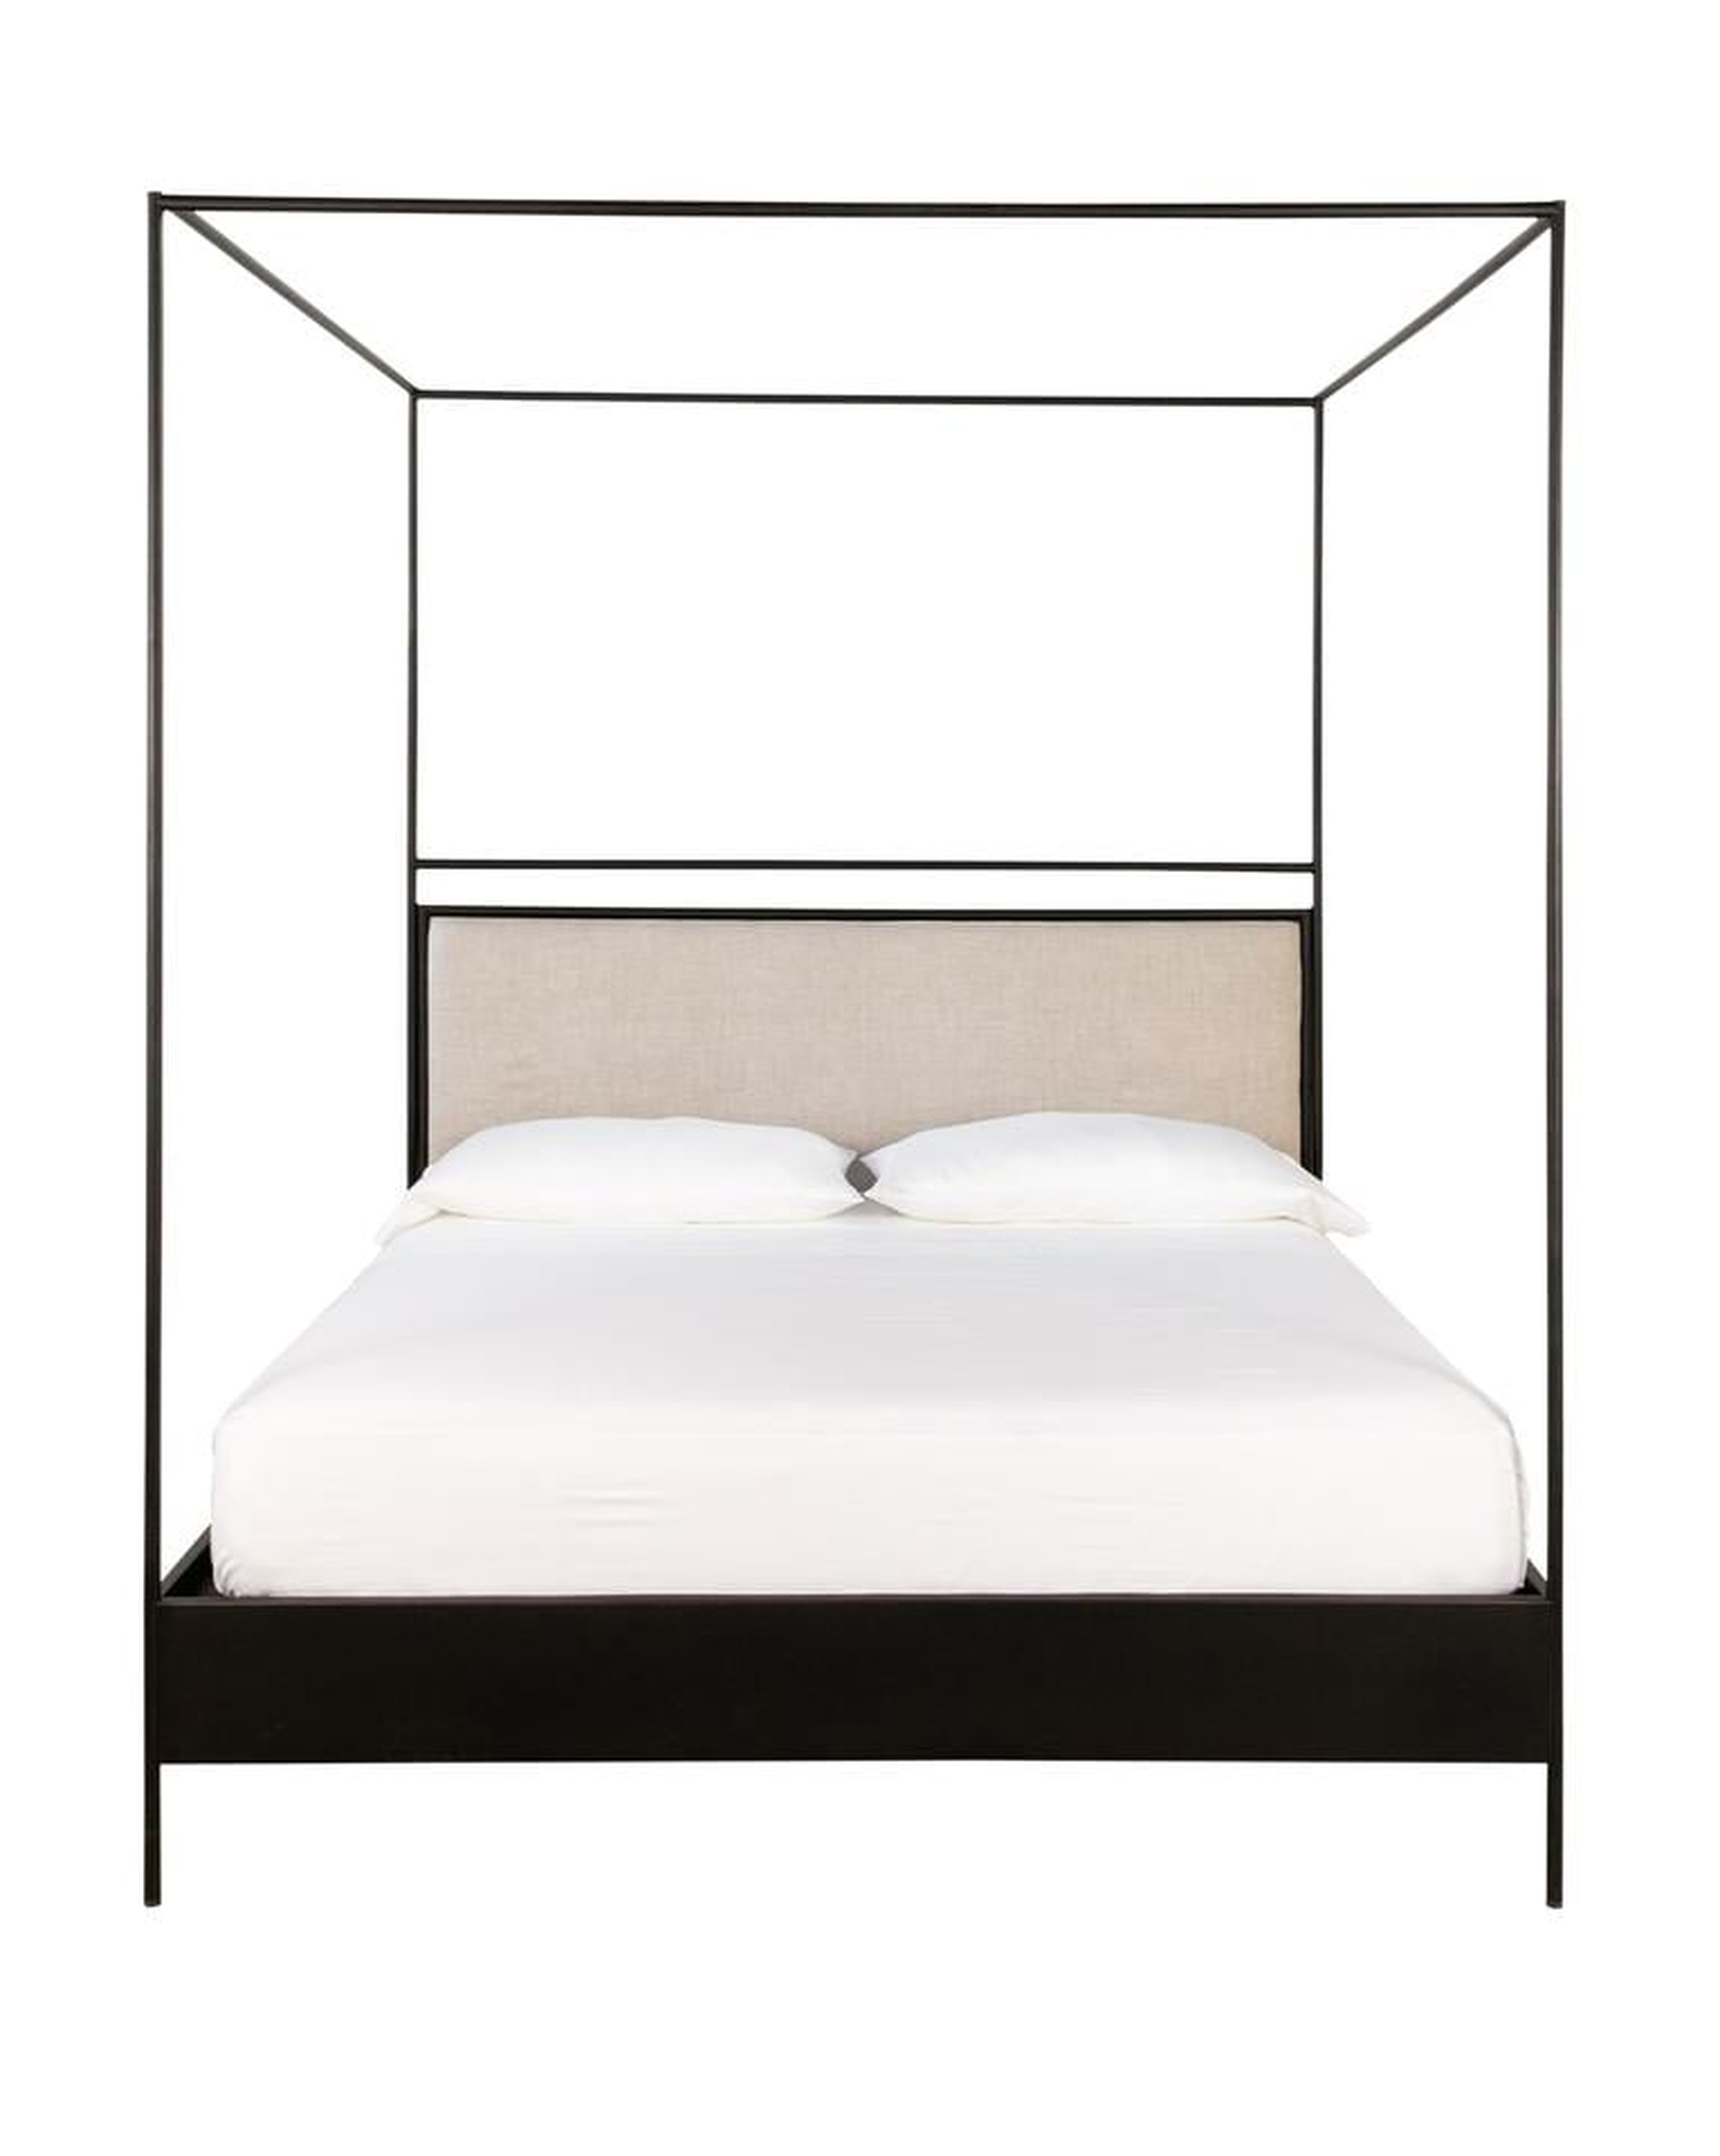 SUTHERLAND CANOPY BED - King - McGee & Co.